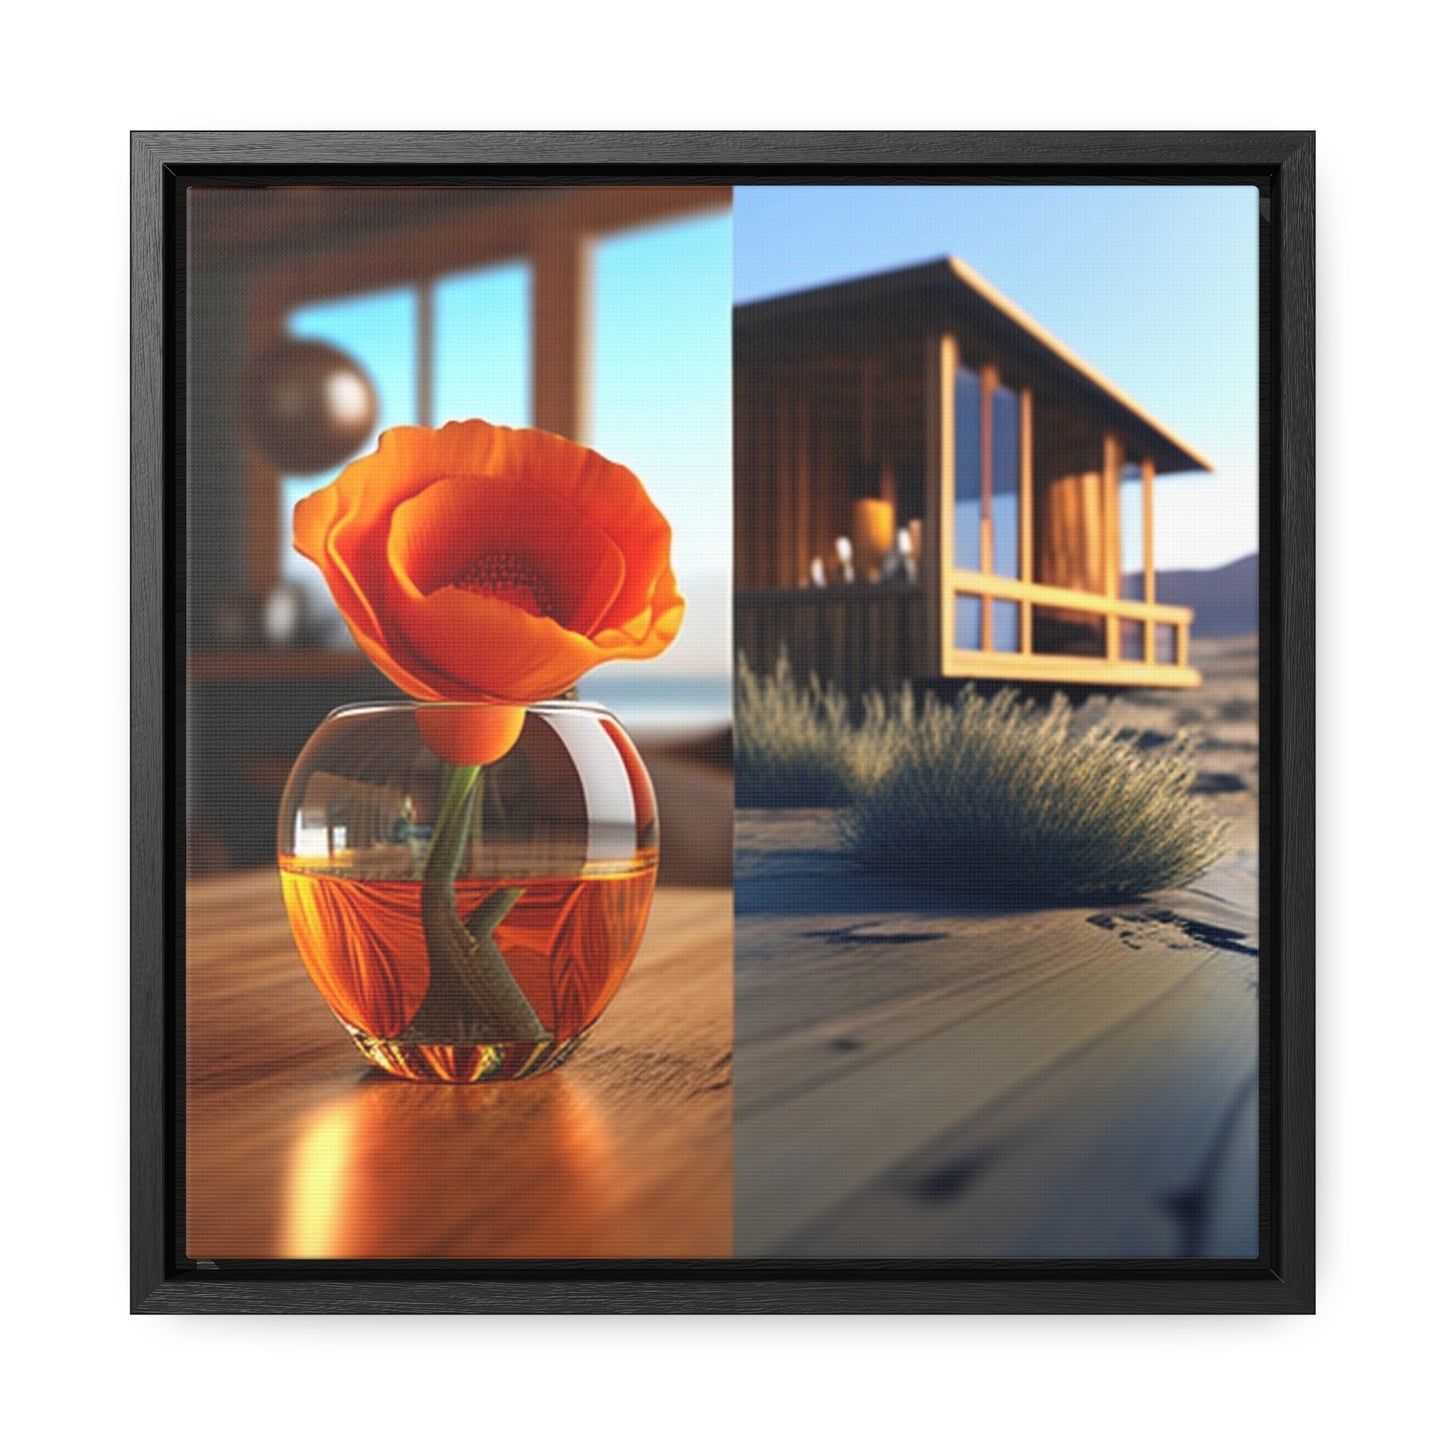 Gallery Canvas Wraps, Square Frame Poppy in a Glass Vase 3